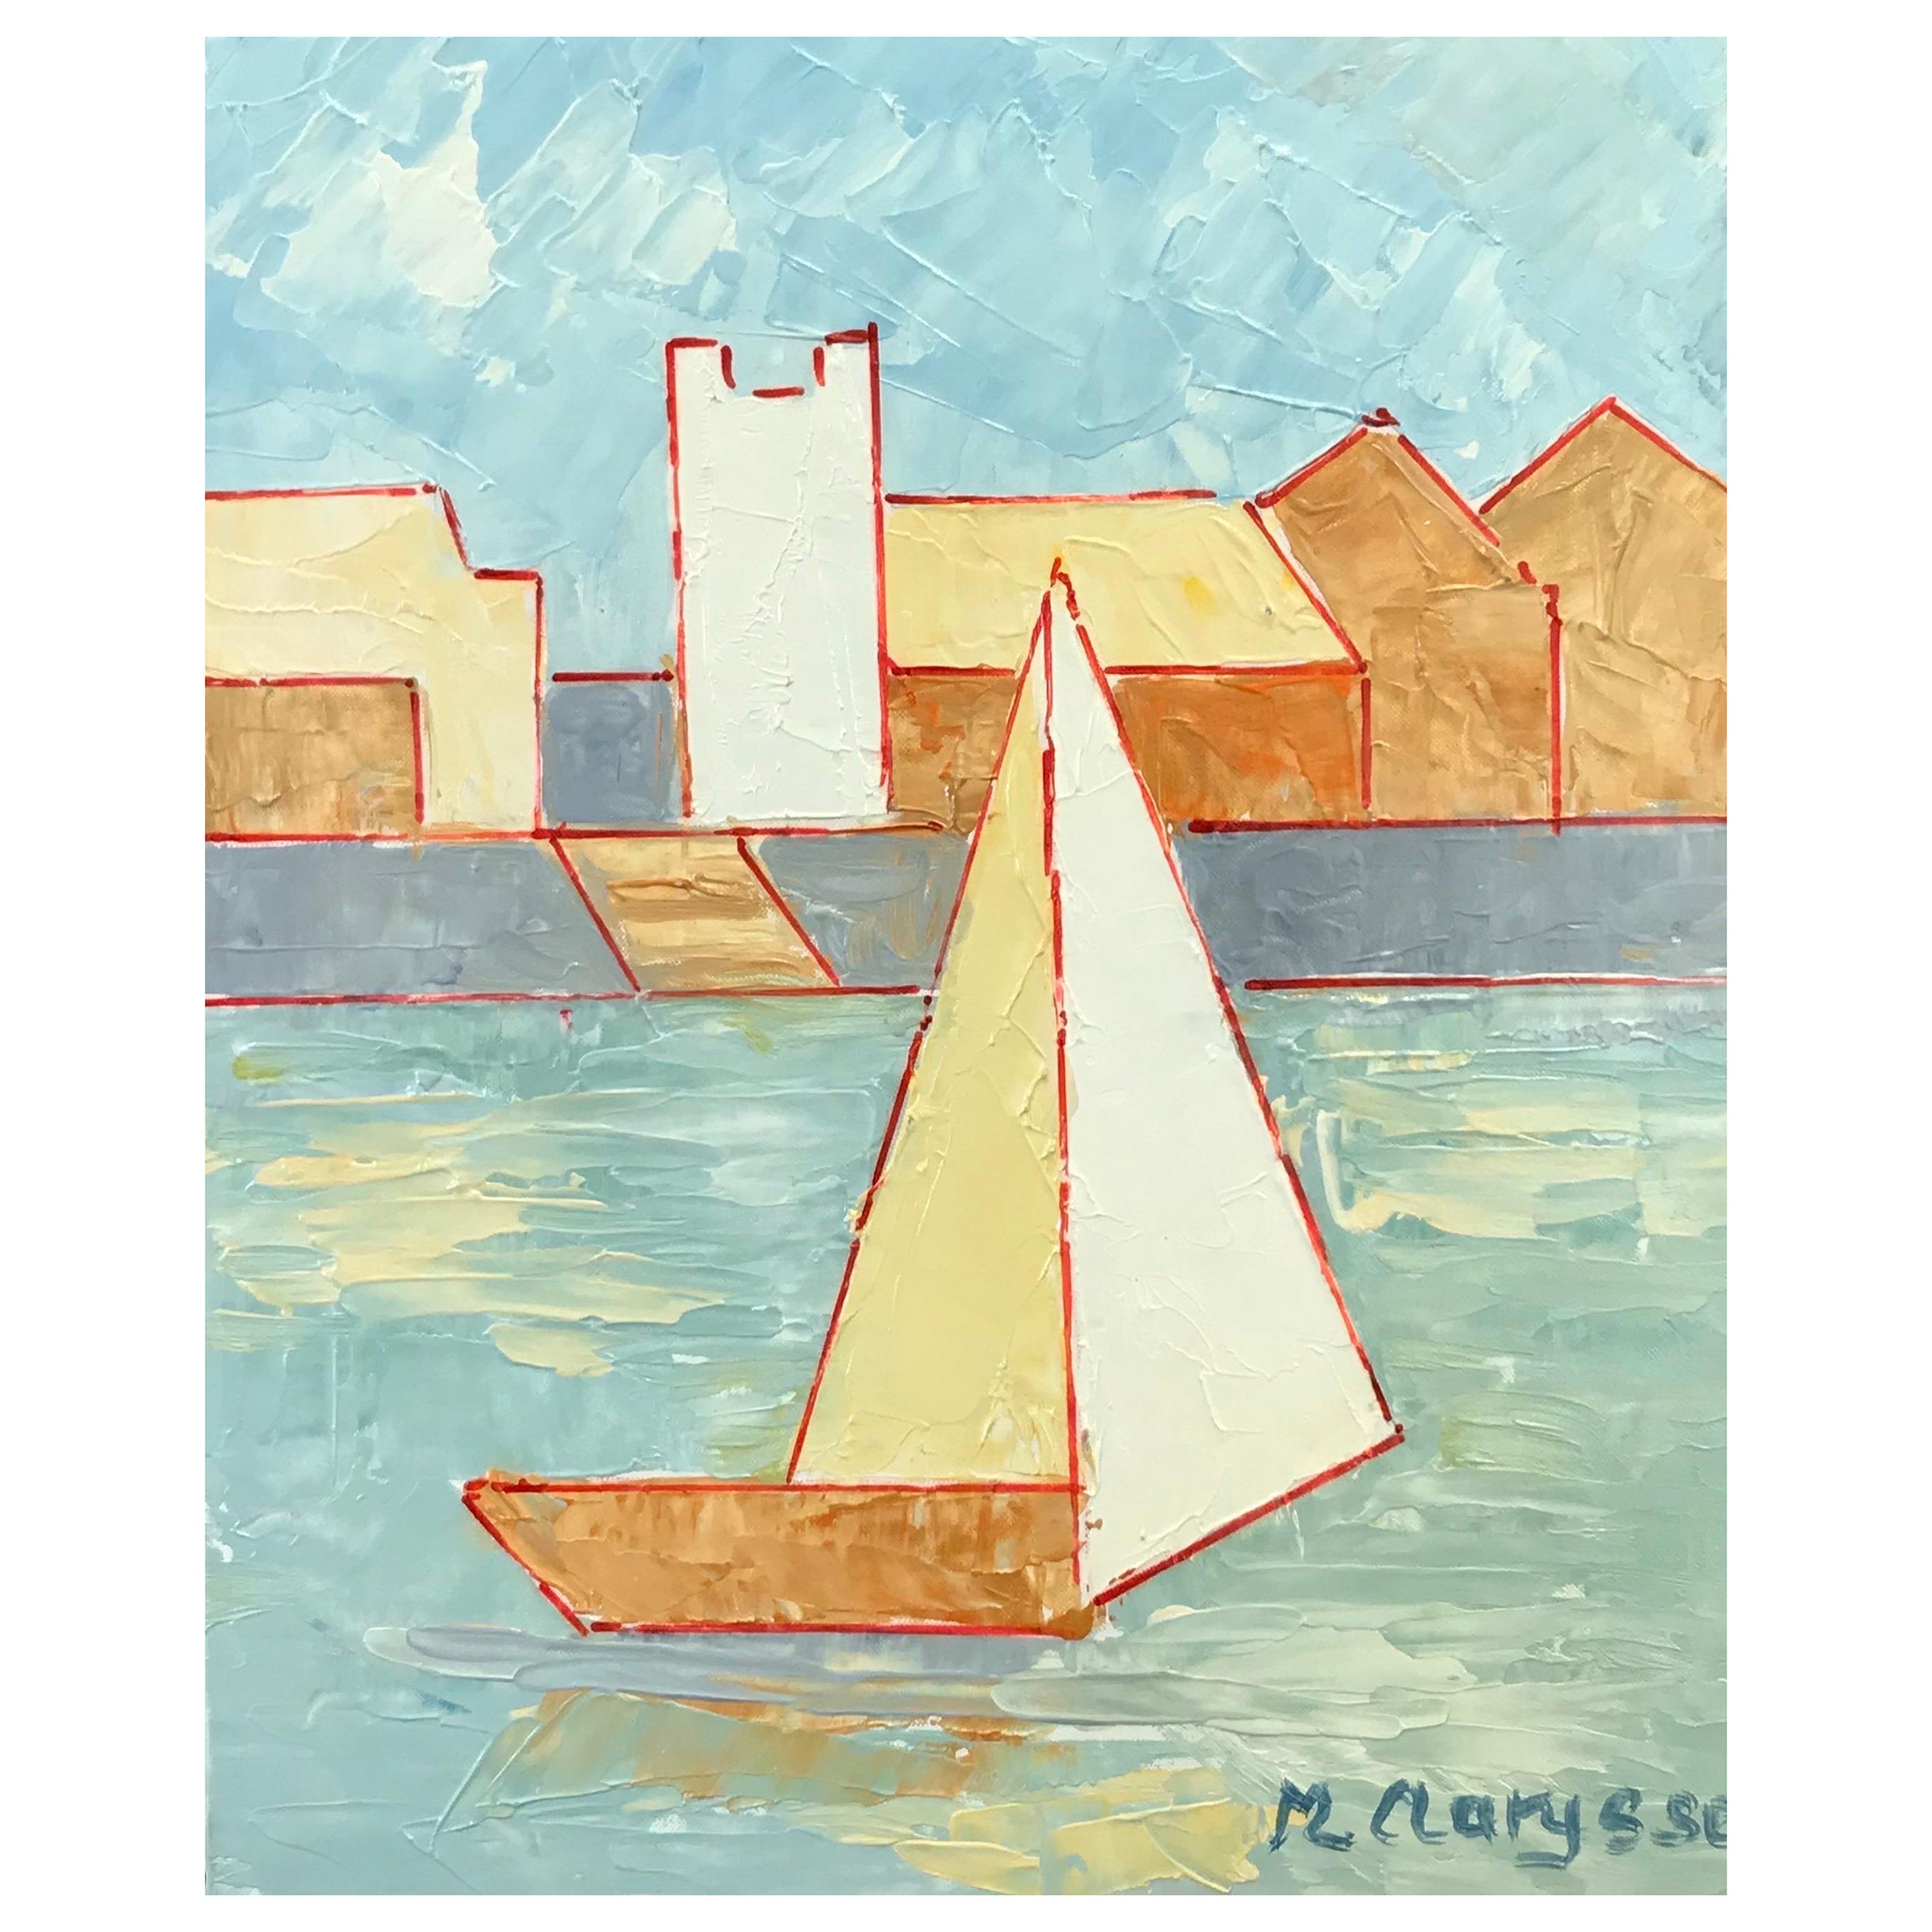 Maggy Clarysse Landscape Painting - Soft Moody Colors Cubist Oil Painting Sailing Boat in Harbor